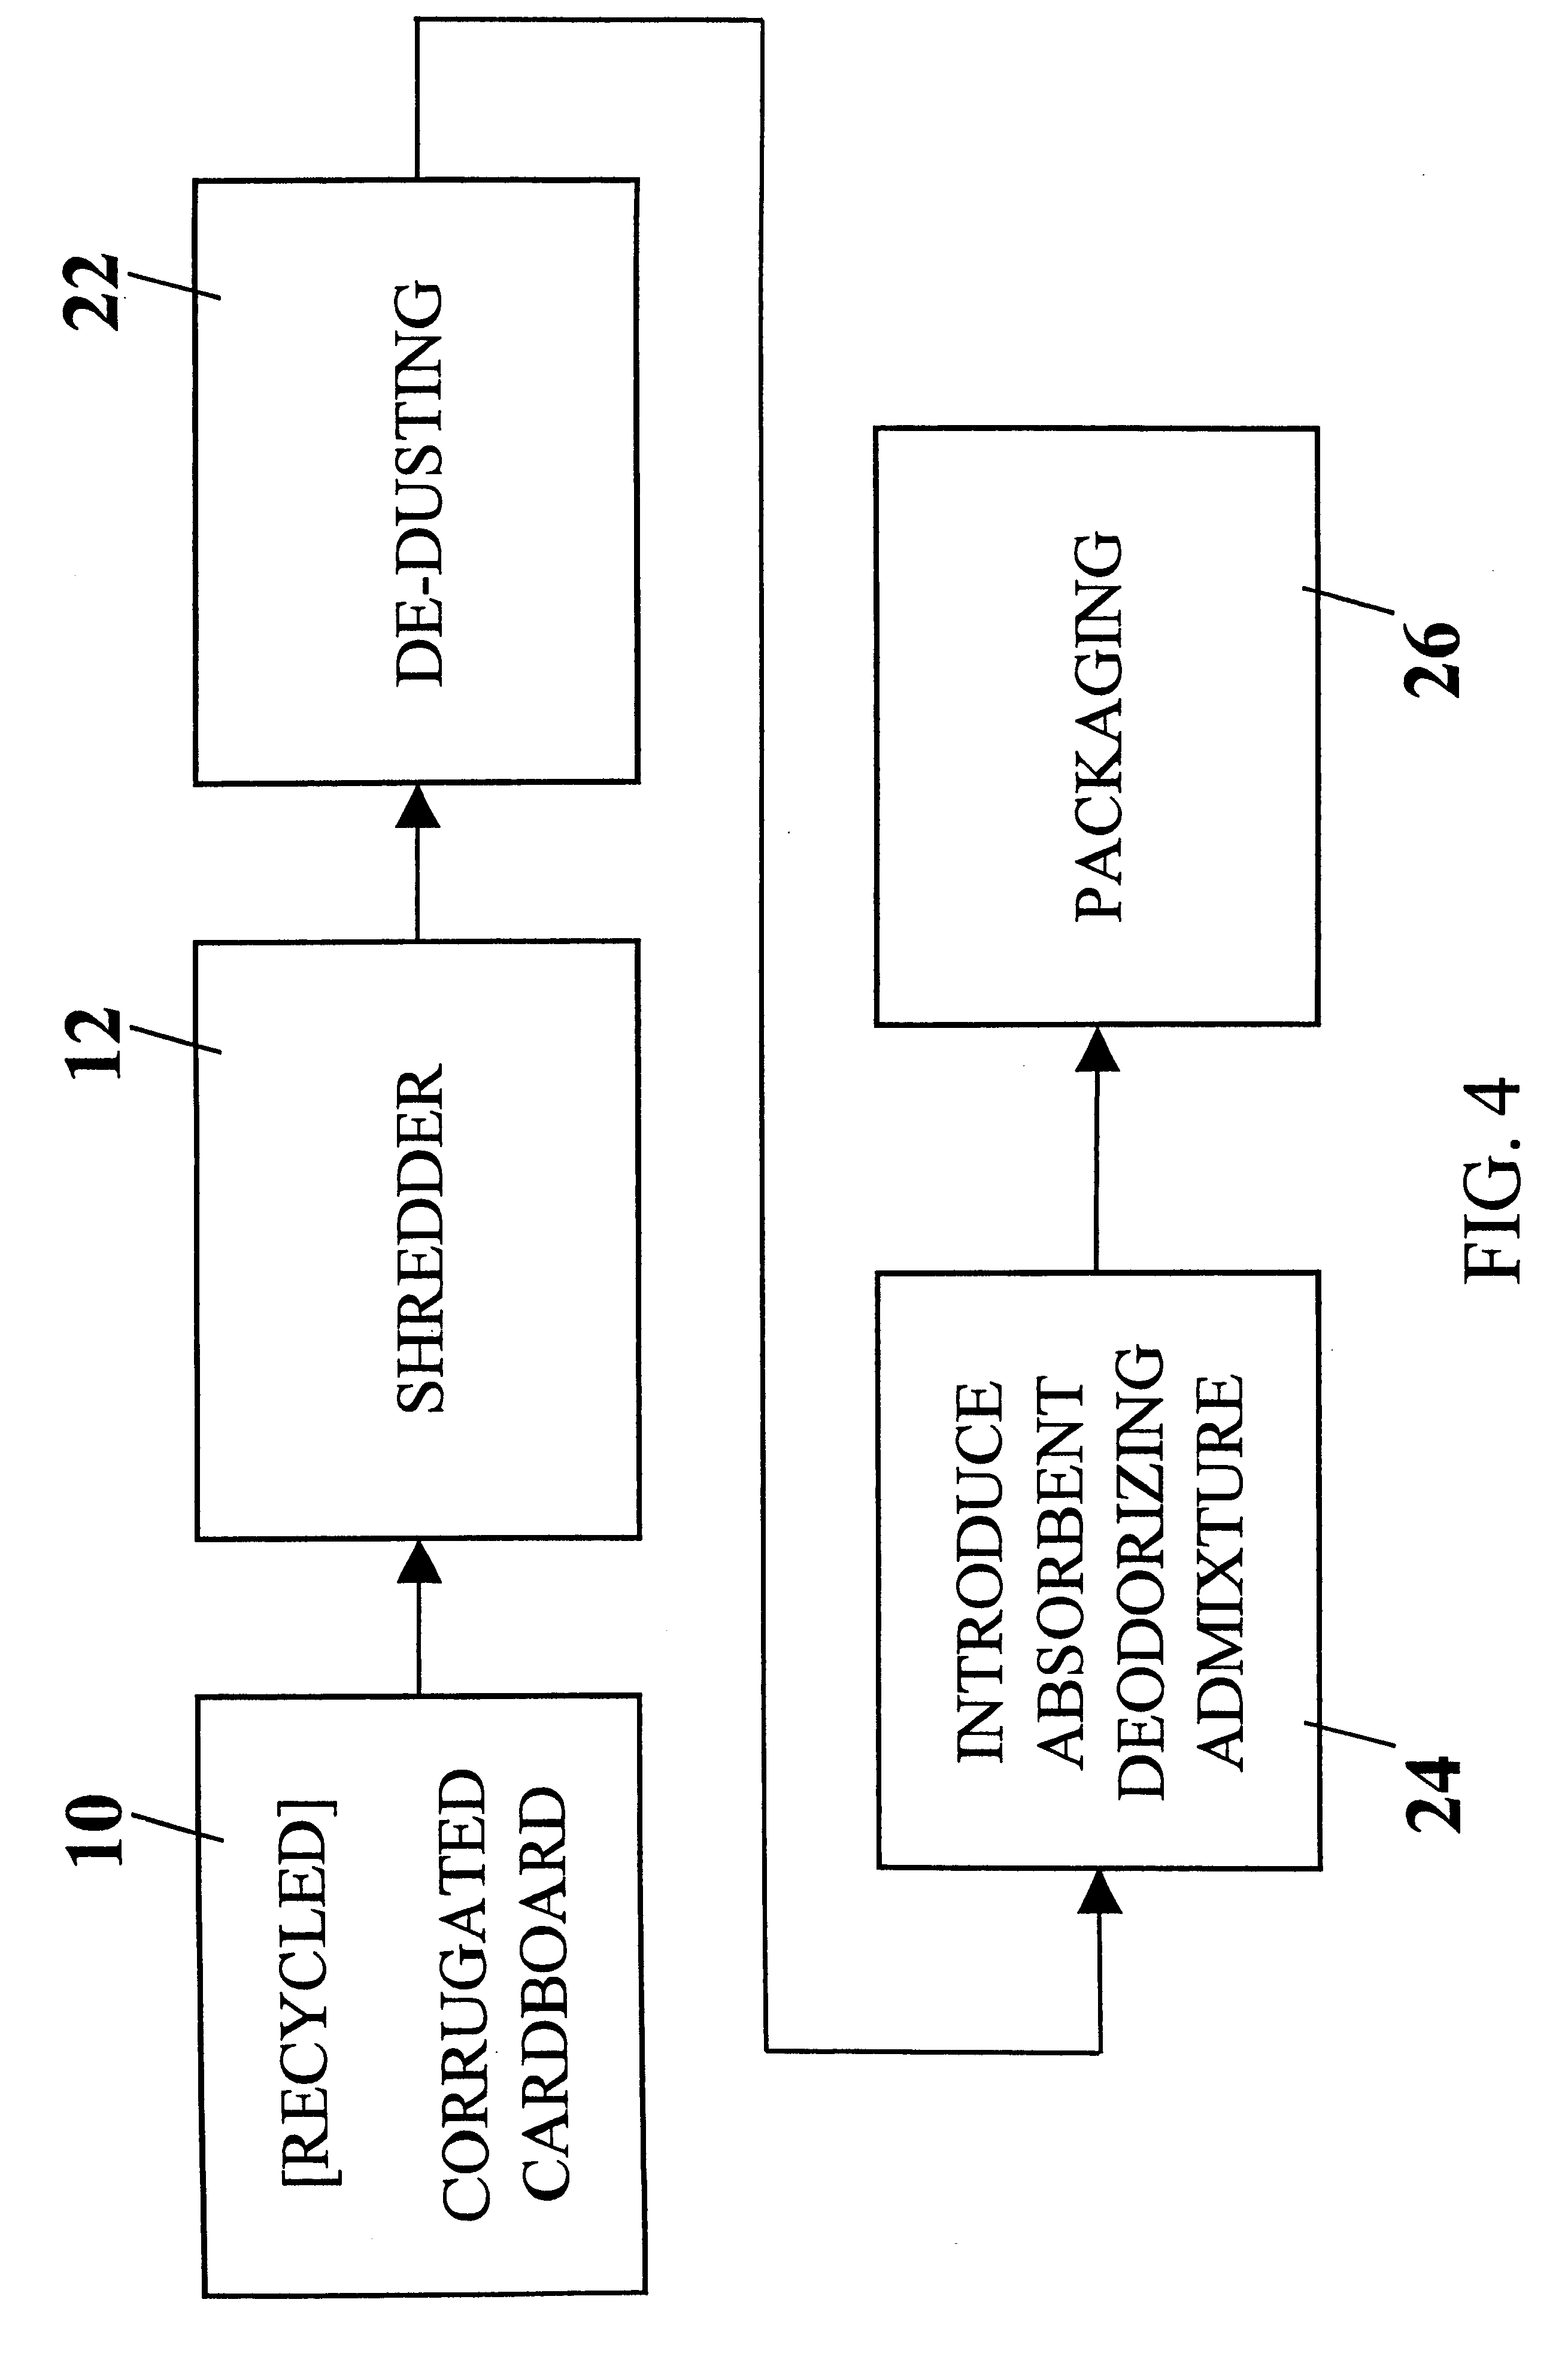 Absorbent, deodorizing, hygienic animal bedding composition and method of manufacture